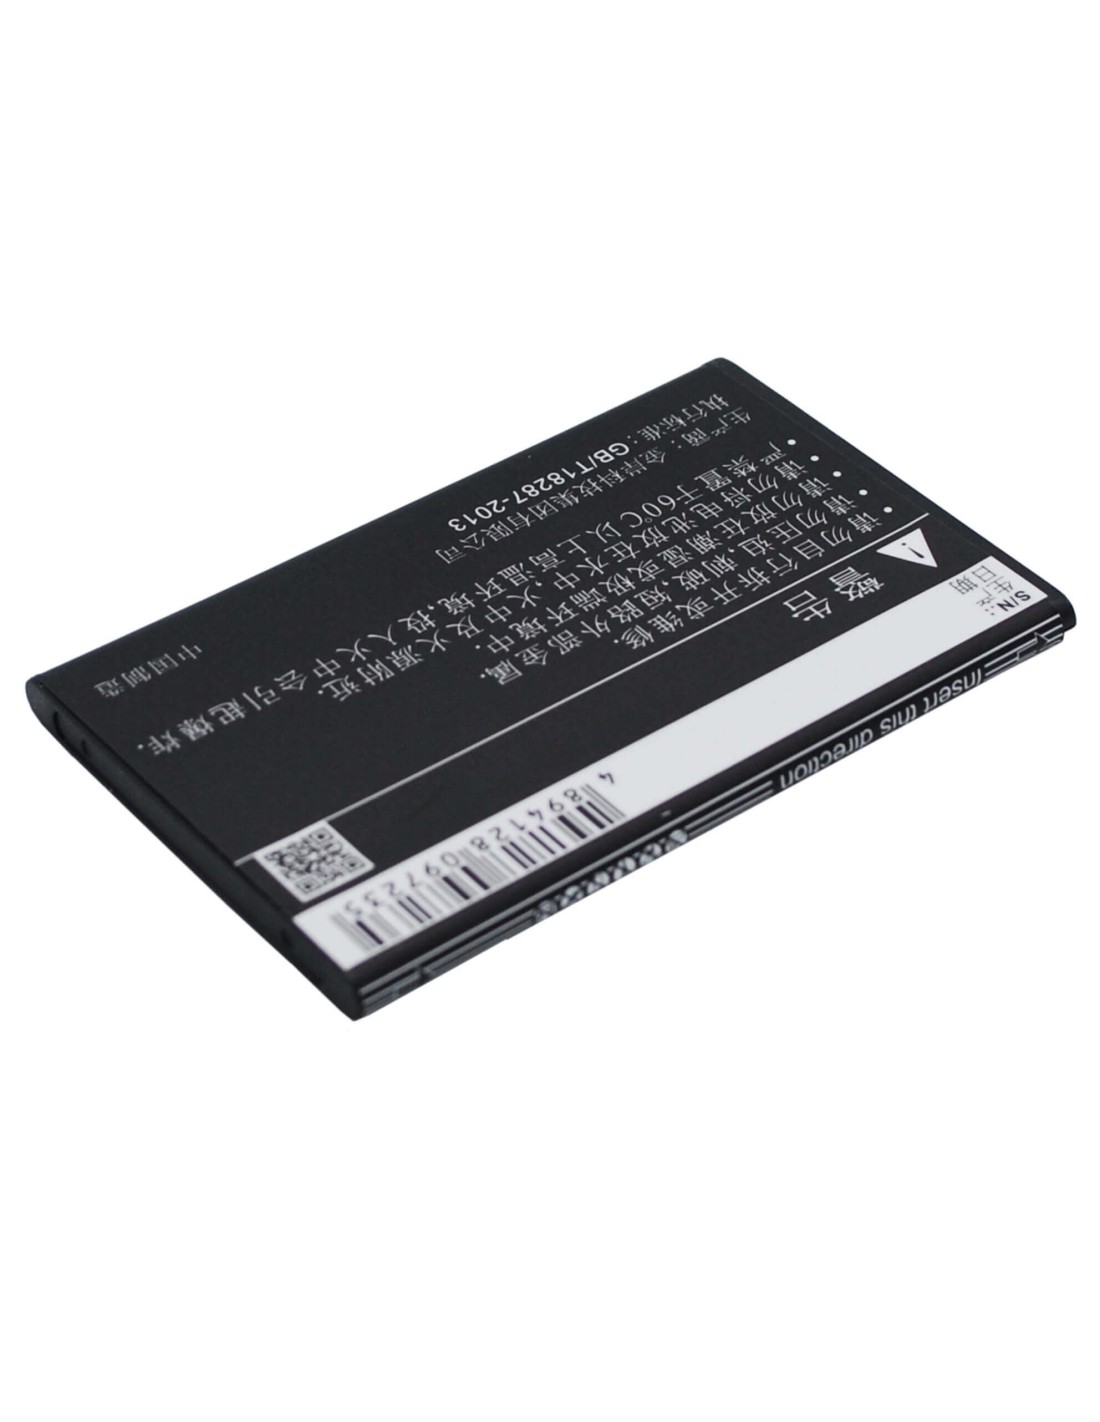 Battery for Coolpad 5010 3.7V, 1000mAh - 3.70Wh